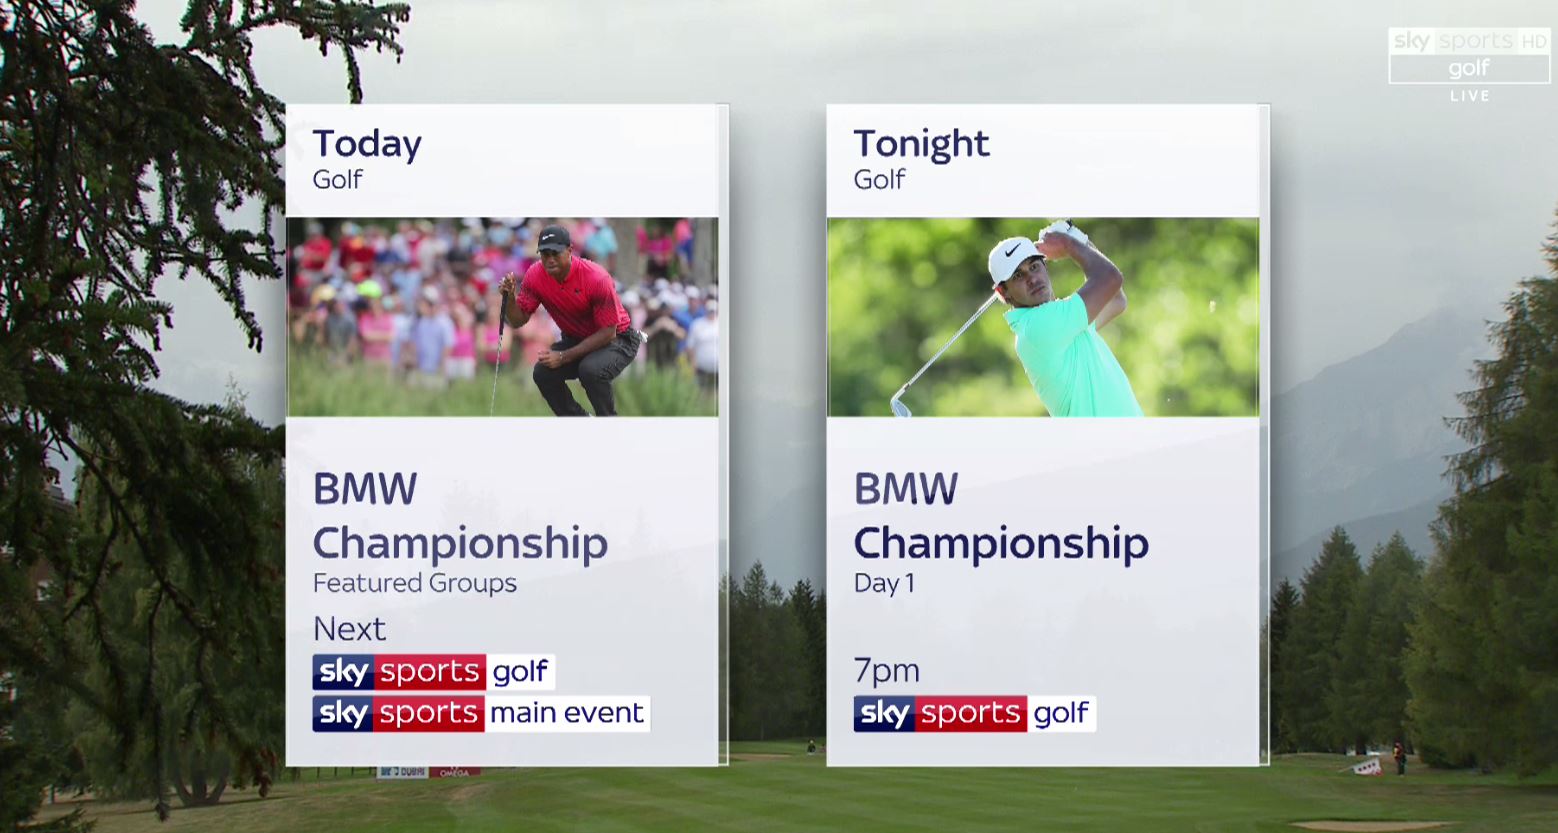 sky golf featured groups